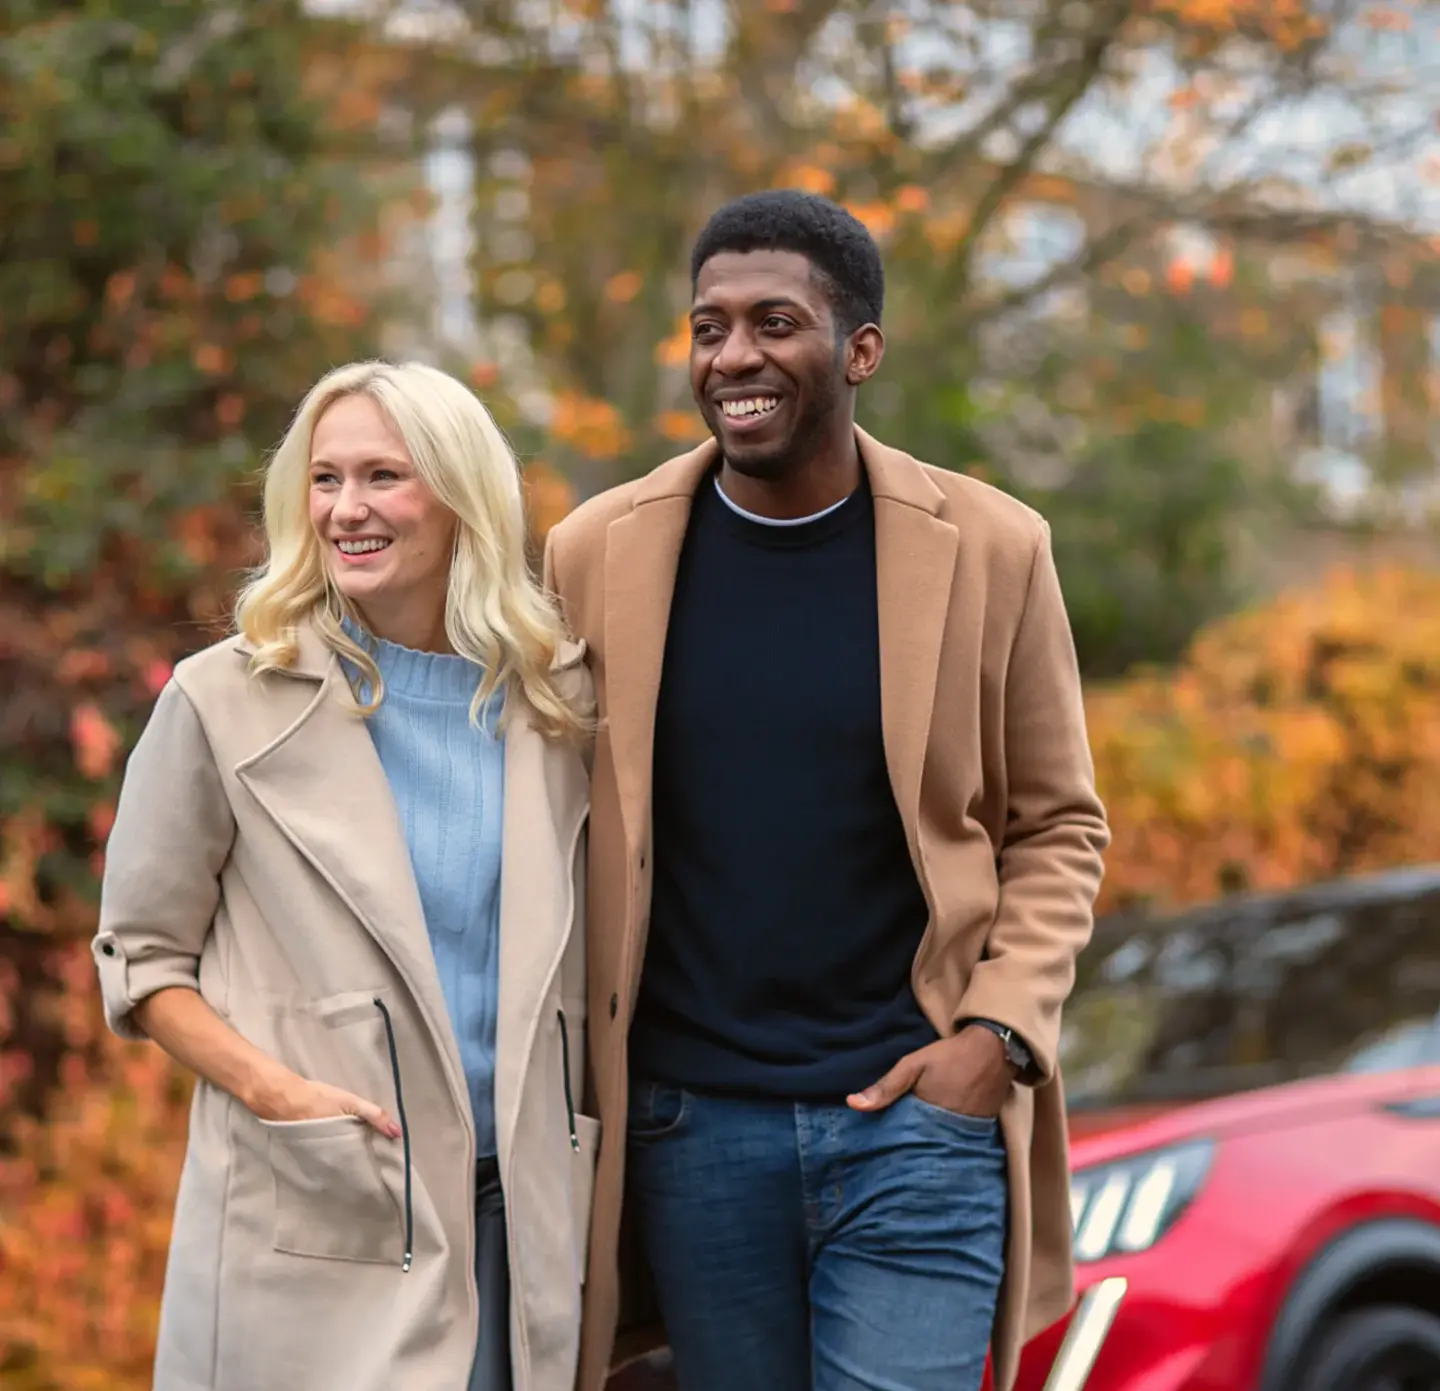 A couple with an arm around each other facing forward, looking away from the camera. Both are smiling and wearing brown coats, with a backdrop of autumnal leaves. Blurred in the background is the front of a red car.